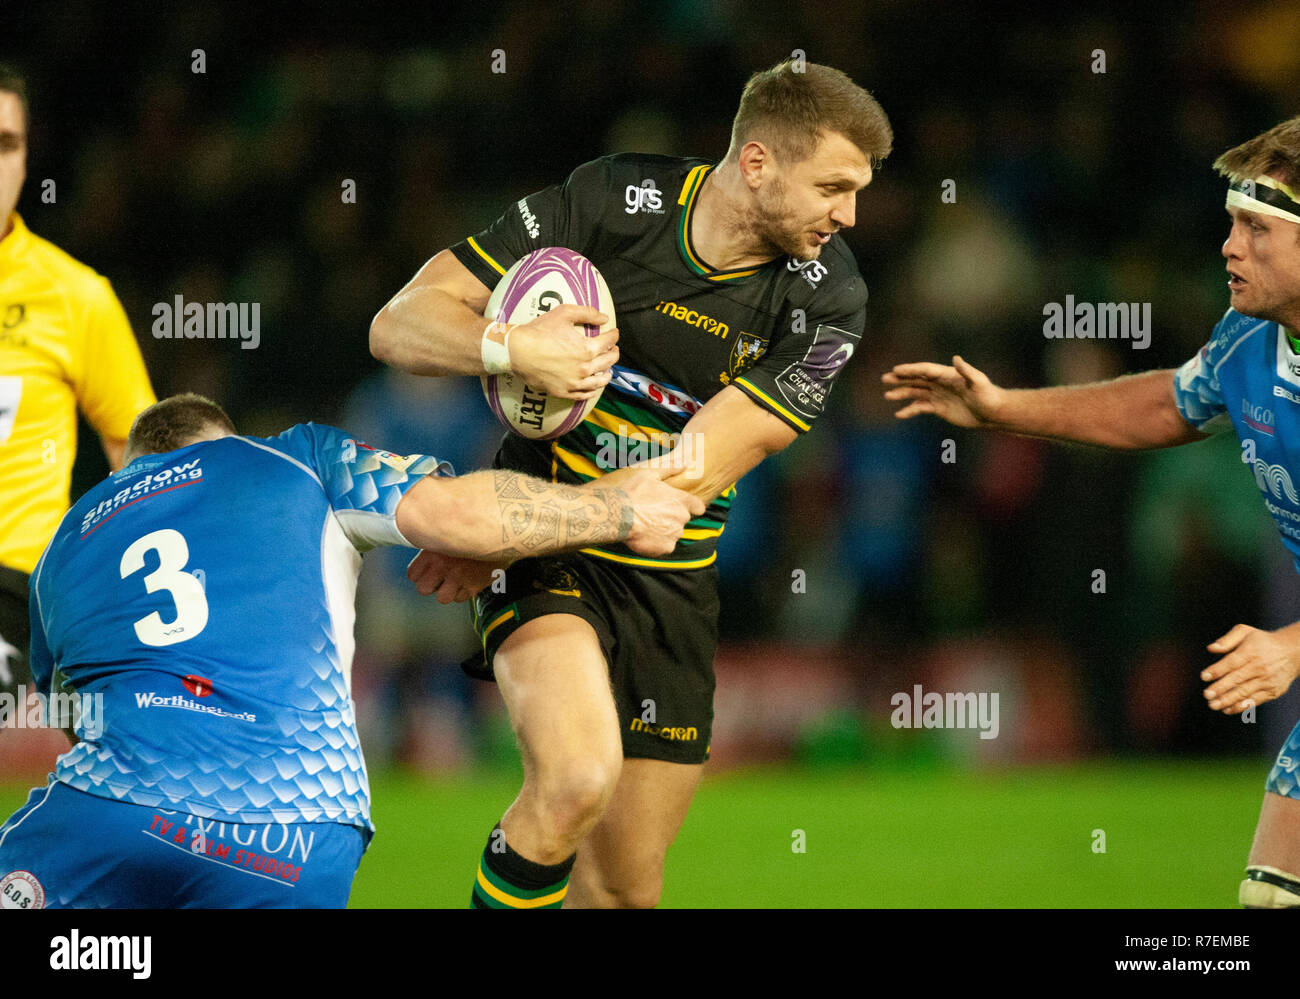 Northampton, UK. 8th December 2018. Dan Biggar of Northampton Saints runs with the ball during the European Rugby Challenge Cup match between Northampton Saints and Dragons. Andrew Taylor/Alamy Live News Stock Photo